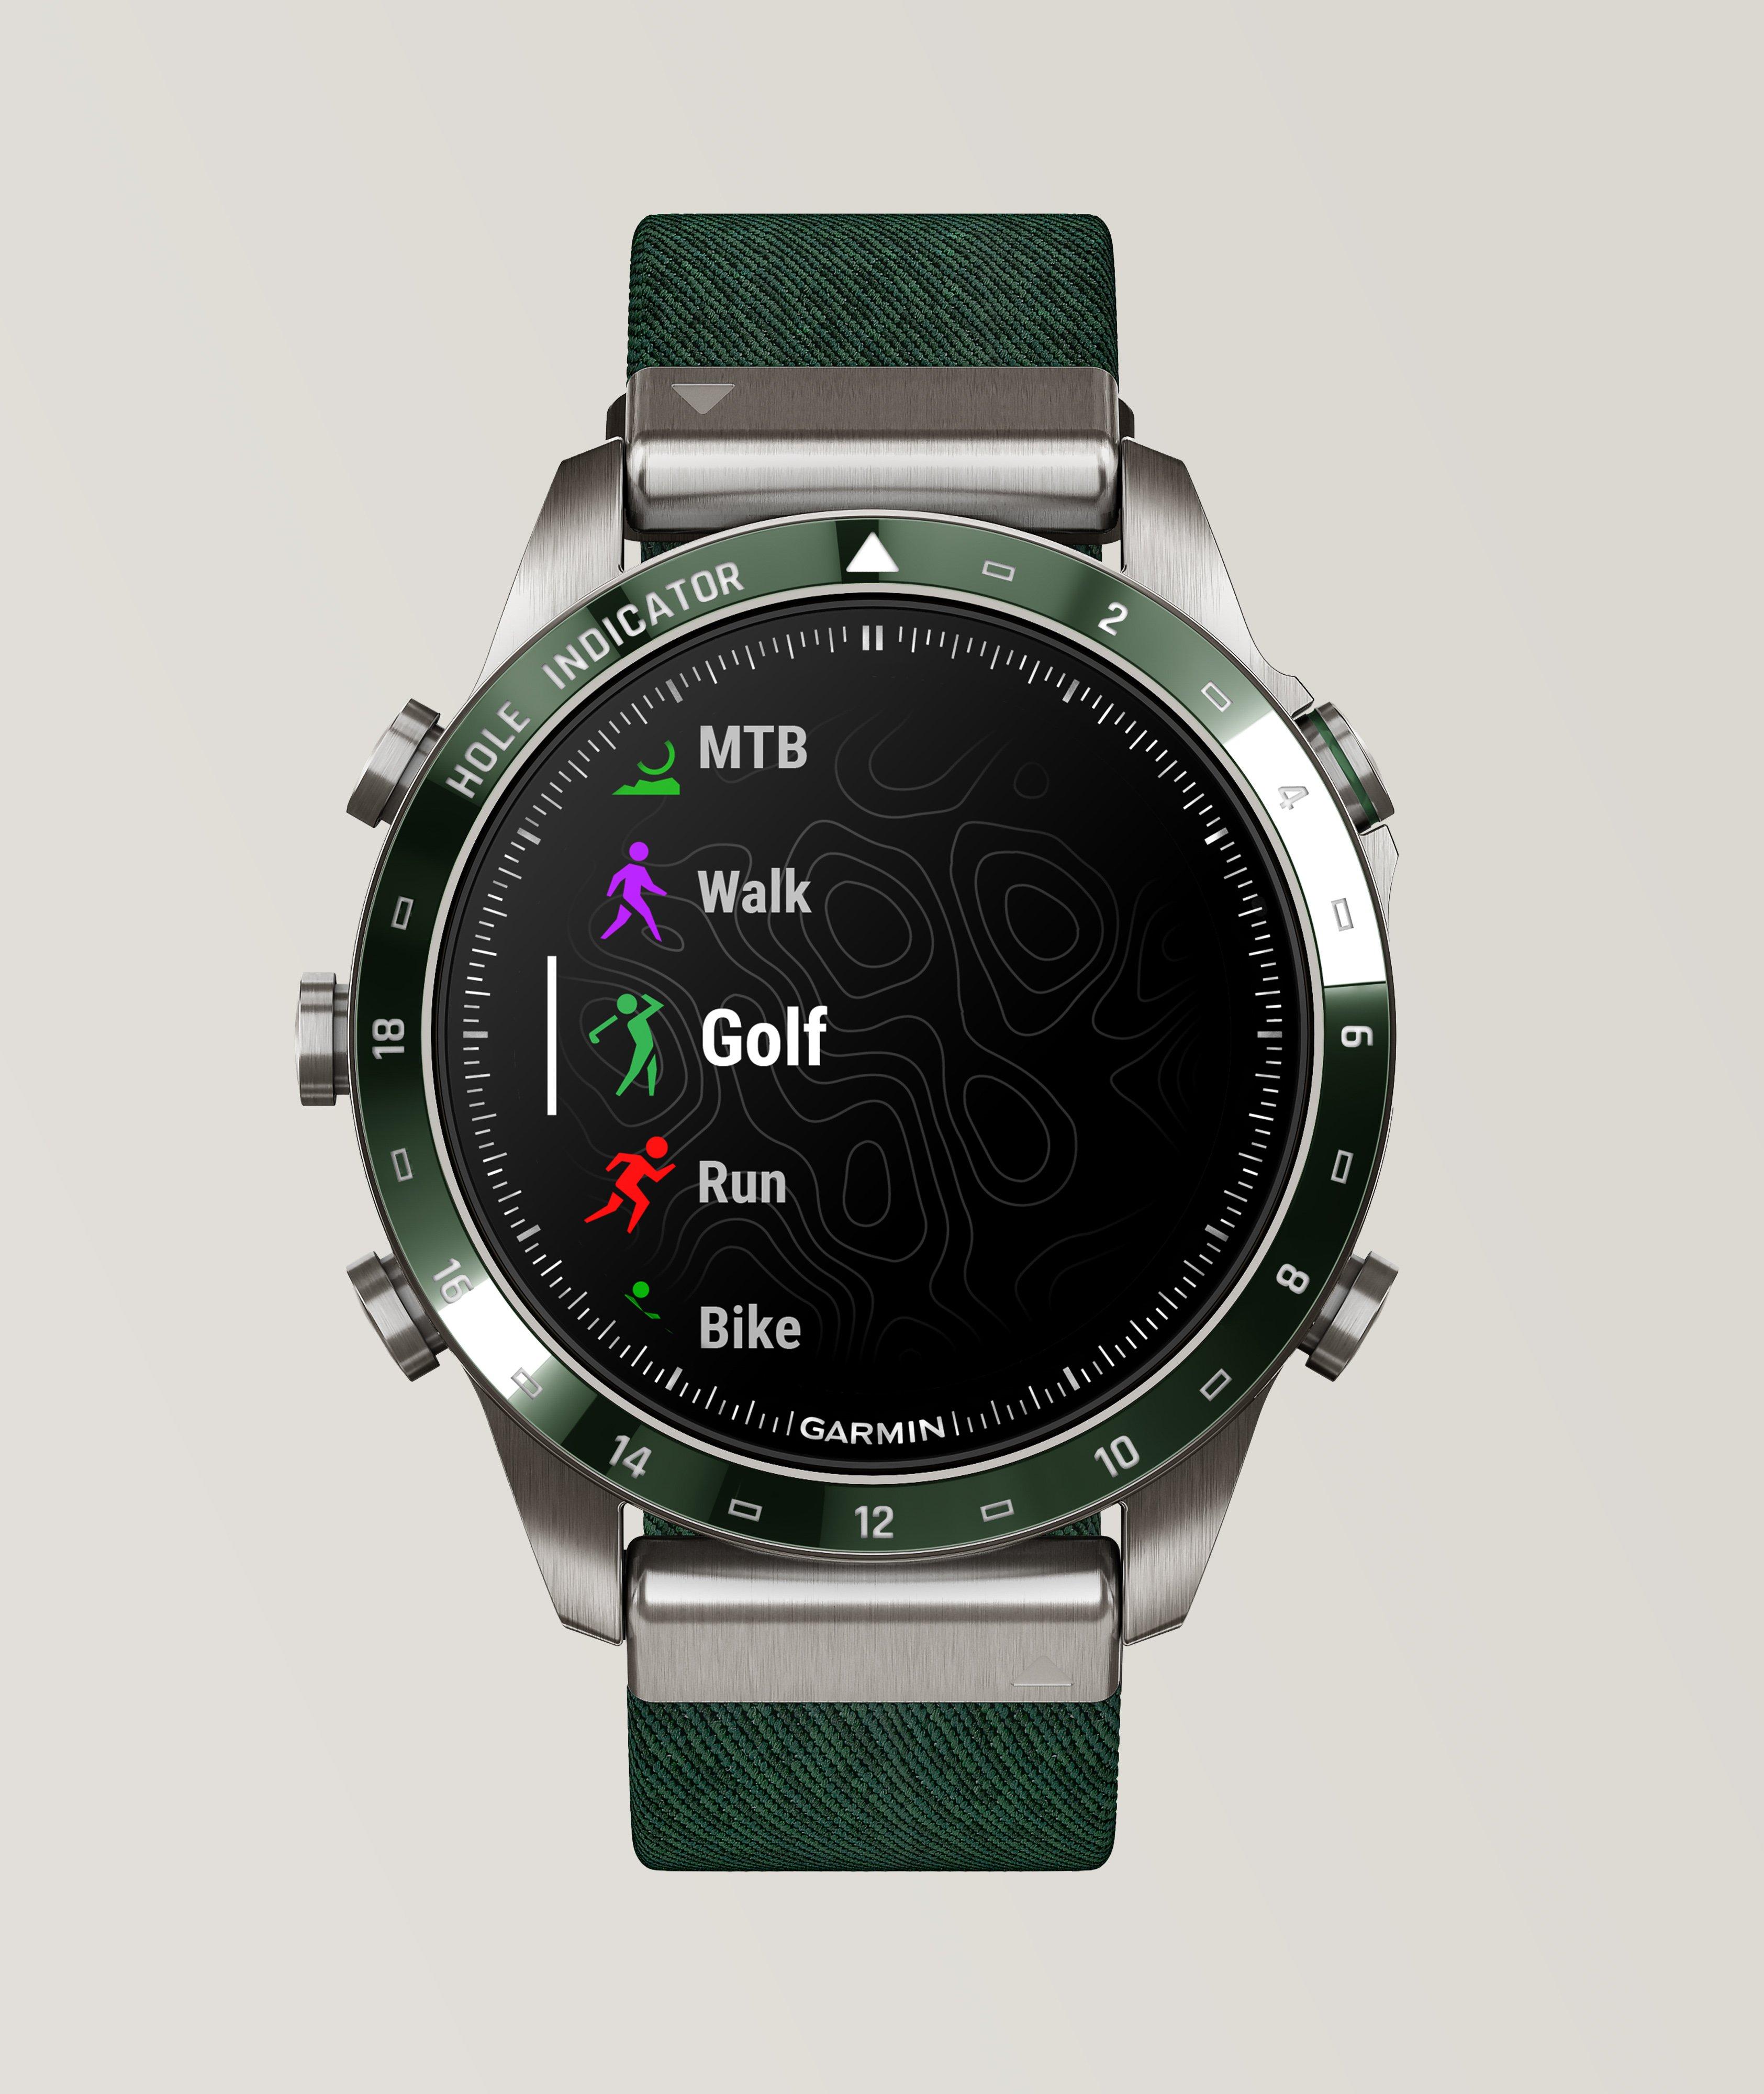 Montre Golfer 2, collection MARQ image 0